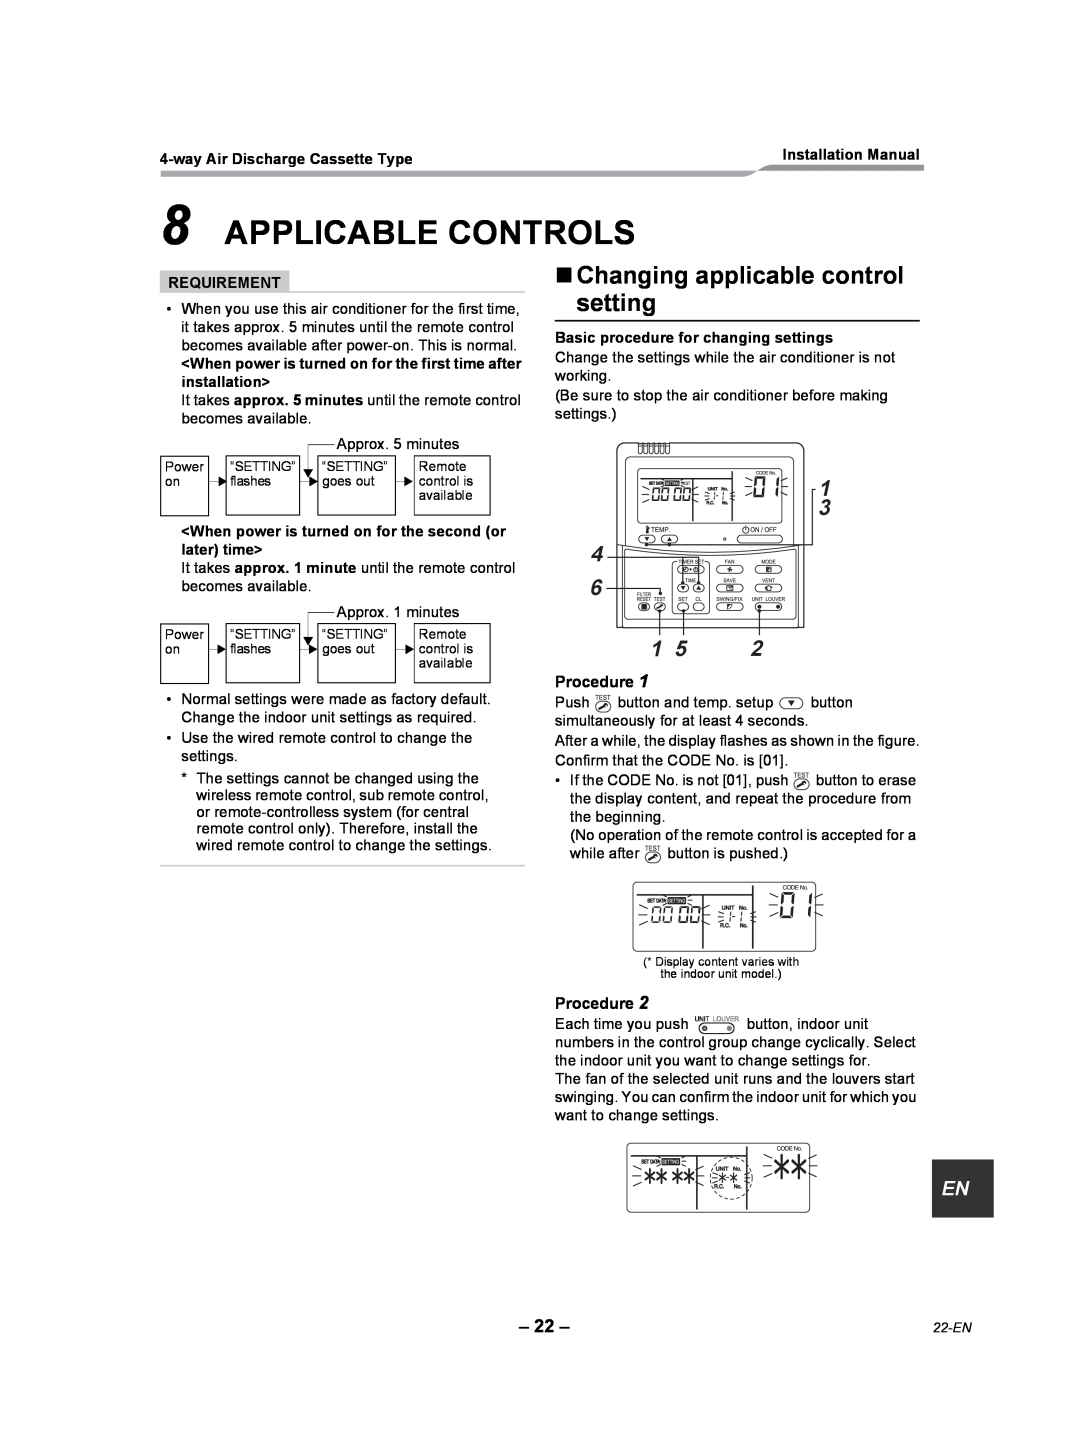 Toshiba RAV-SP180UT-UL Applicable Controls, „Changing applicable control setting, Procedure, Requirement 